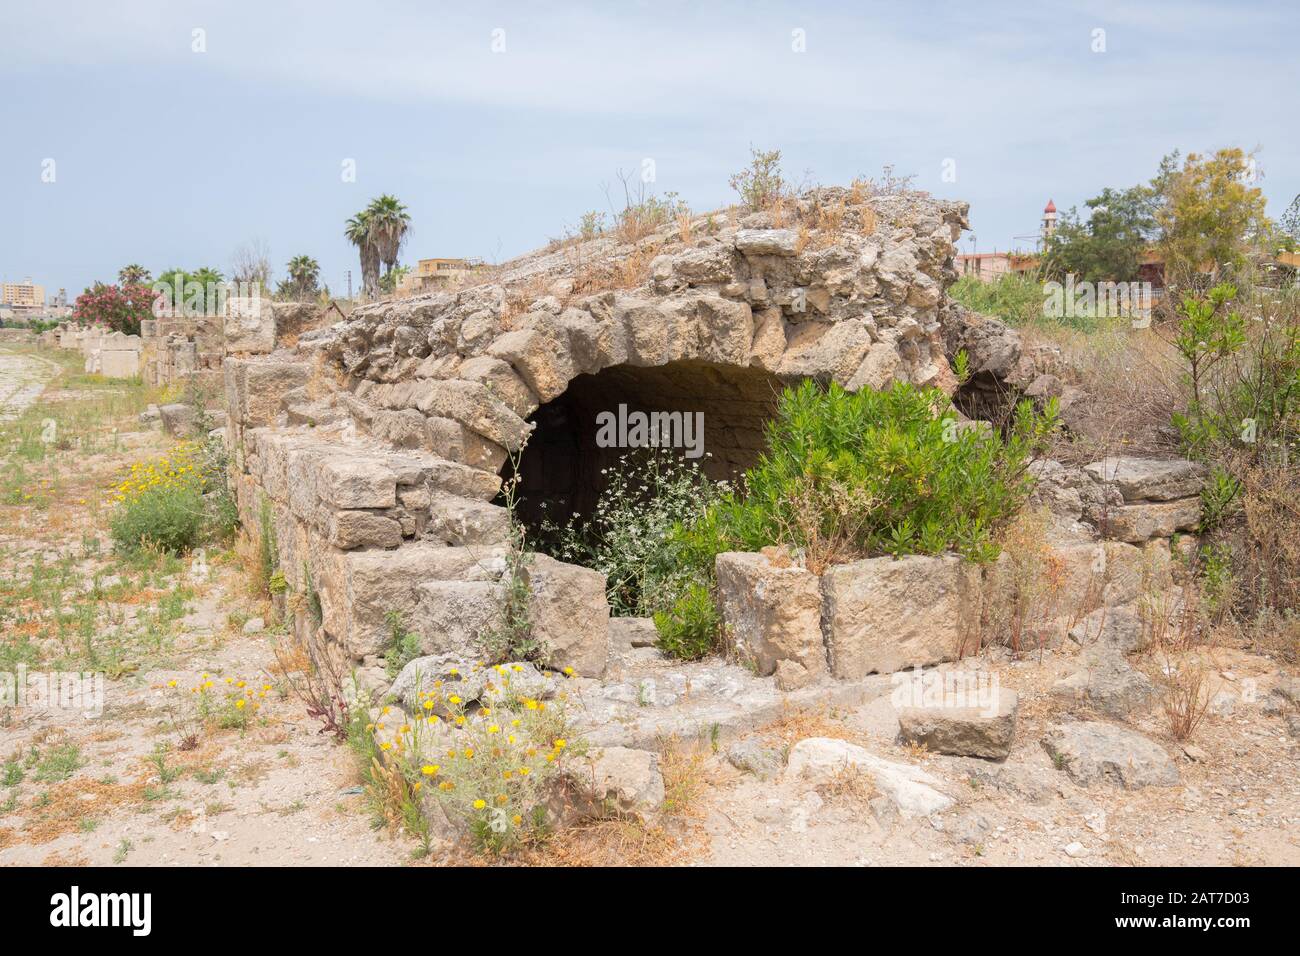 Al-Bass Tyre necropolis. Roman remains in Tyre. Tyre is an ancient Phoenician city. Tyre, Lebanon - June, 2019 Stock Photo